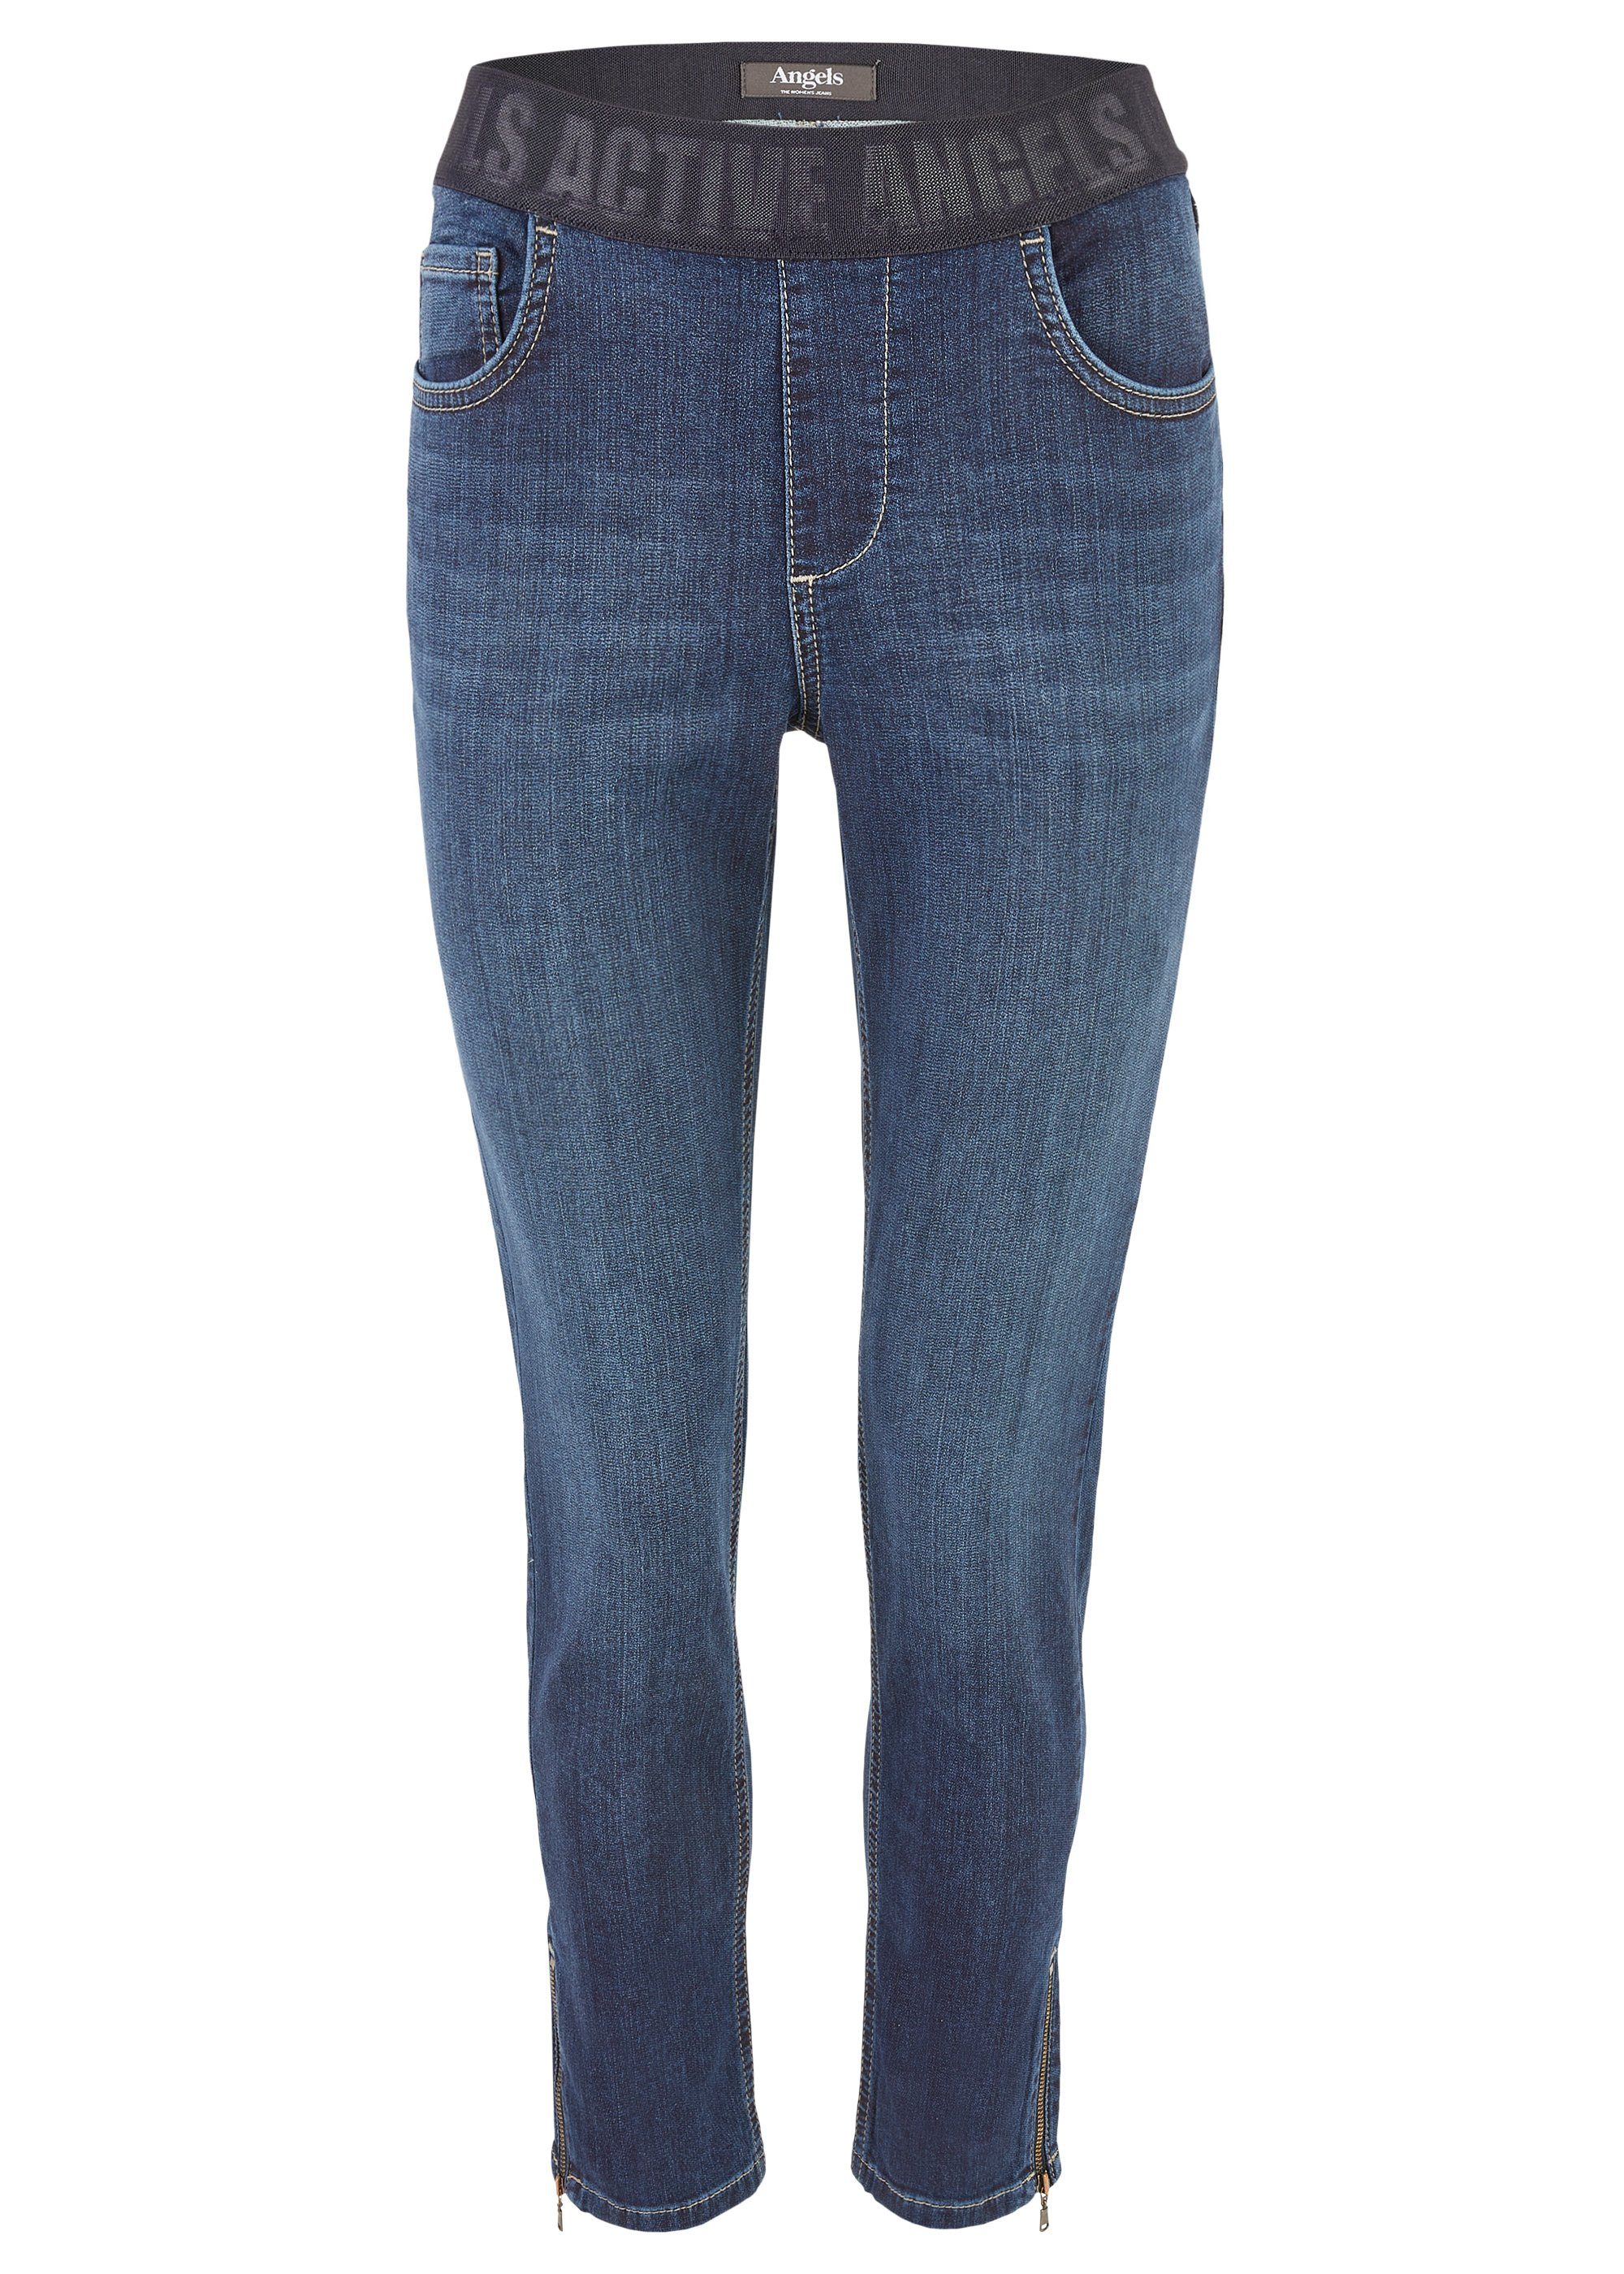 ANGELS Stretch-Jeans ANGELS SKINNY SHAPE night - used 120500.305 STRETCH blue ZIP JEANS 585